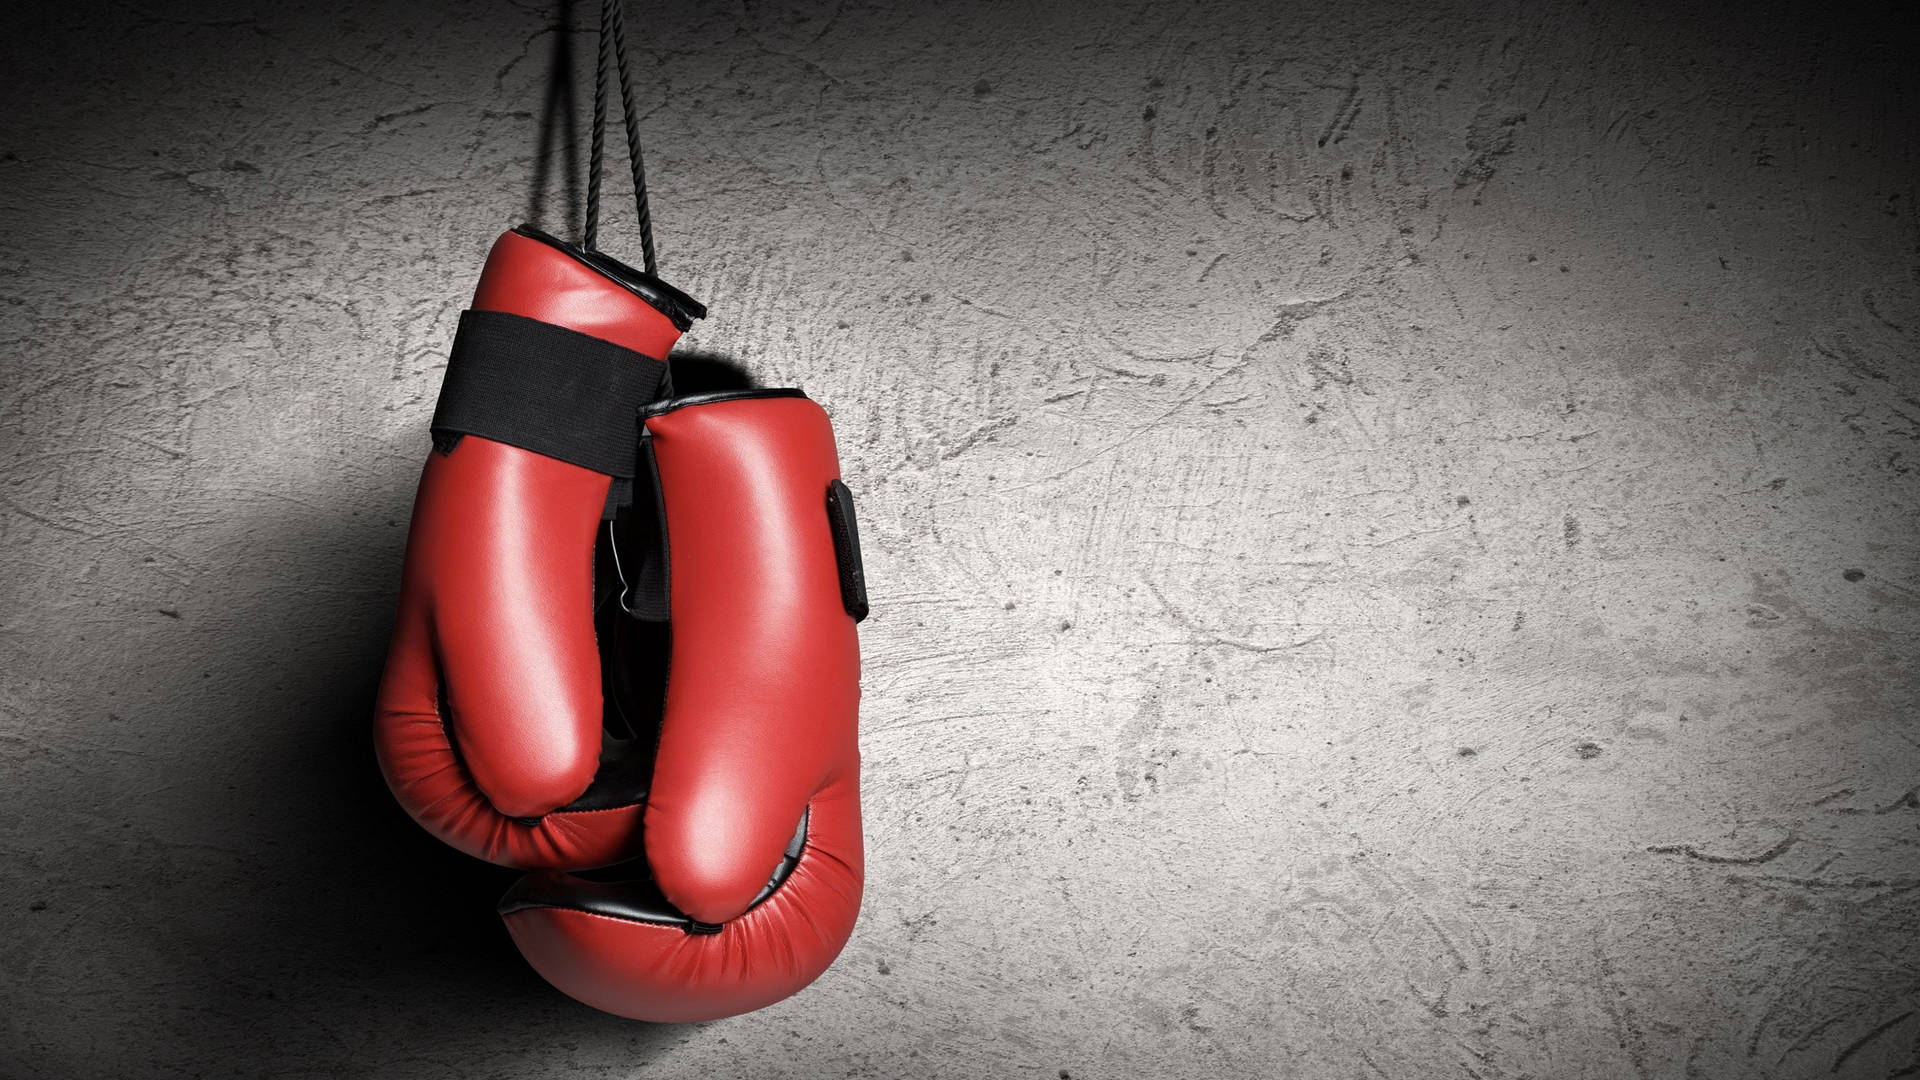 Step in the ring: Taking the sport of boxing up a notch. Wallpaper